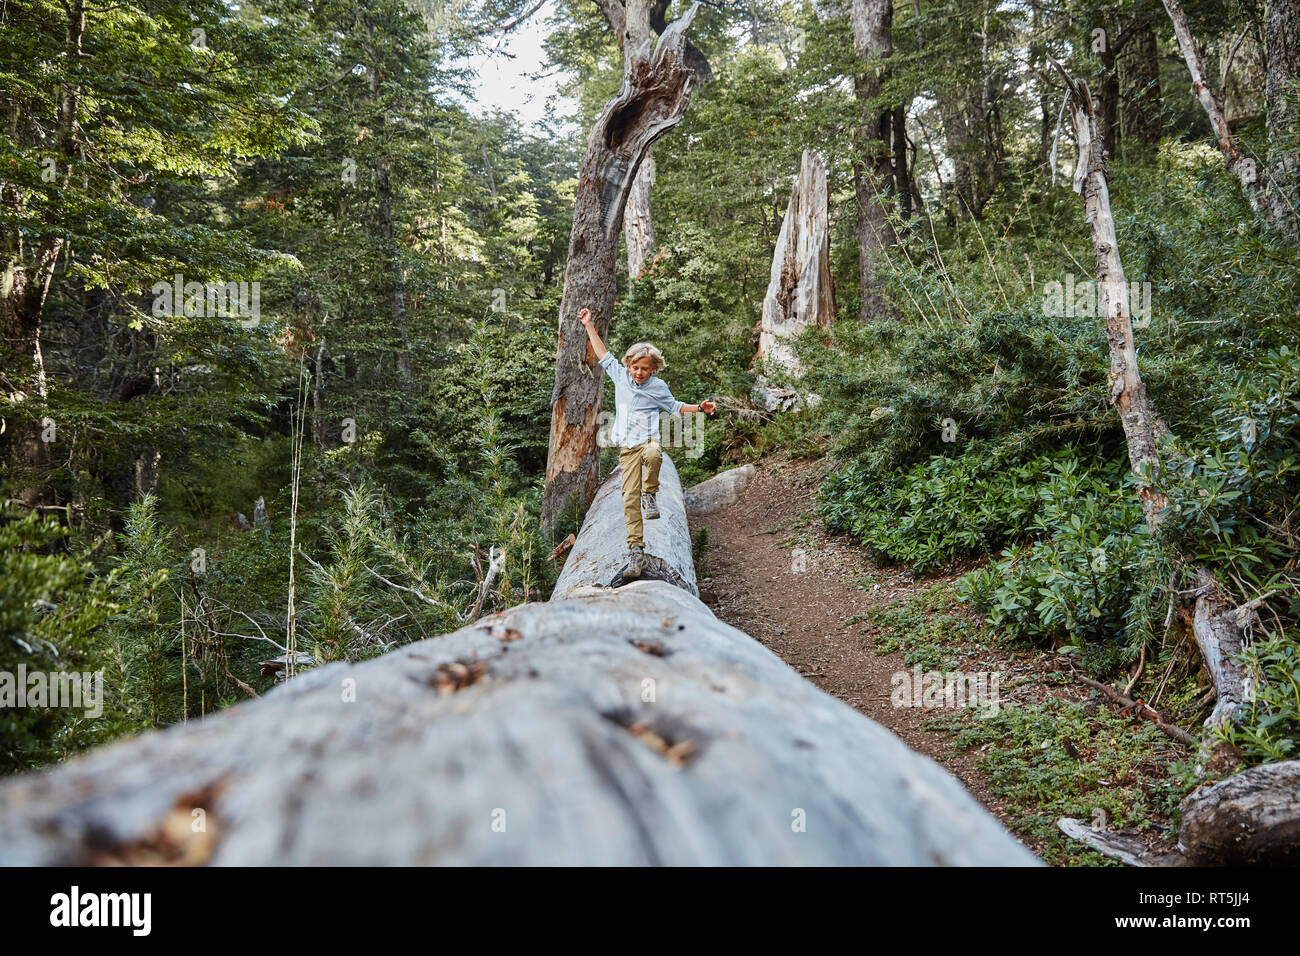 Chile, Puren, Nahuelbuta National Park, boy balancing on a tree trunk in forest Stock Photo